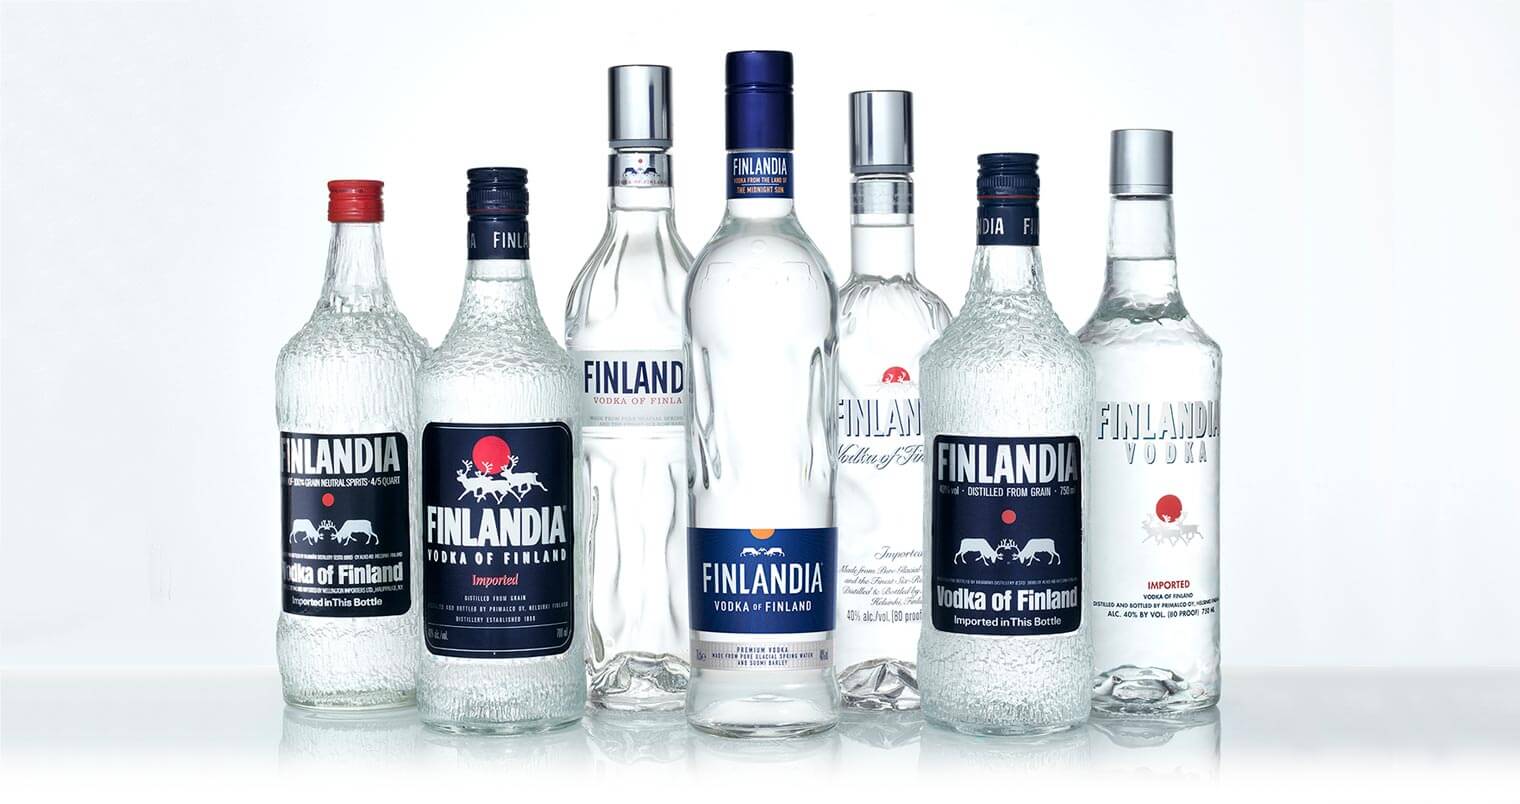 Finlandia Vodka New Packaging, bottle selections on white with reflection, featrured image